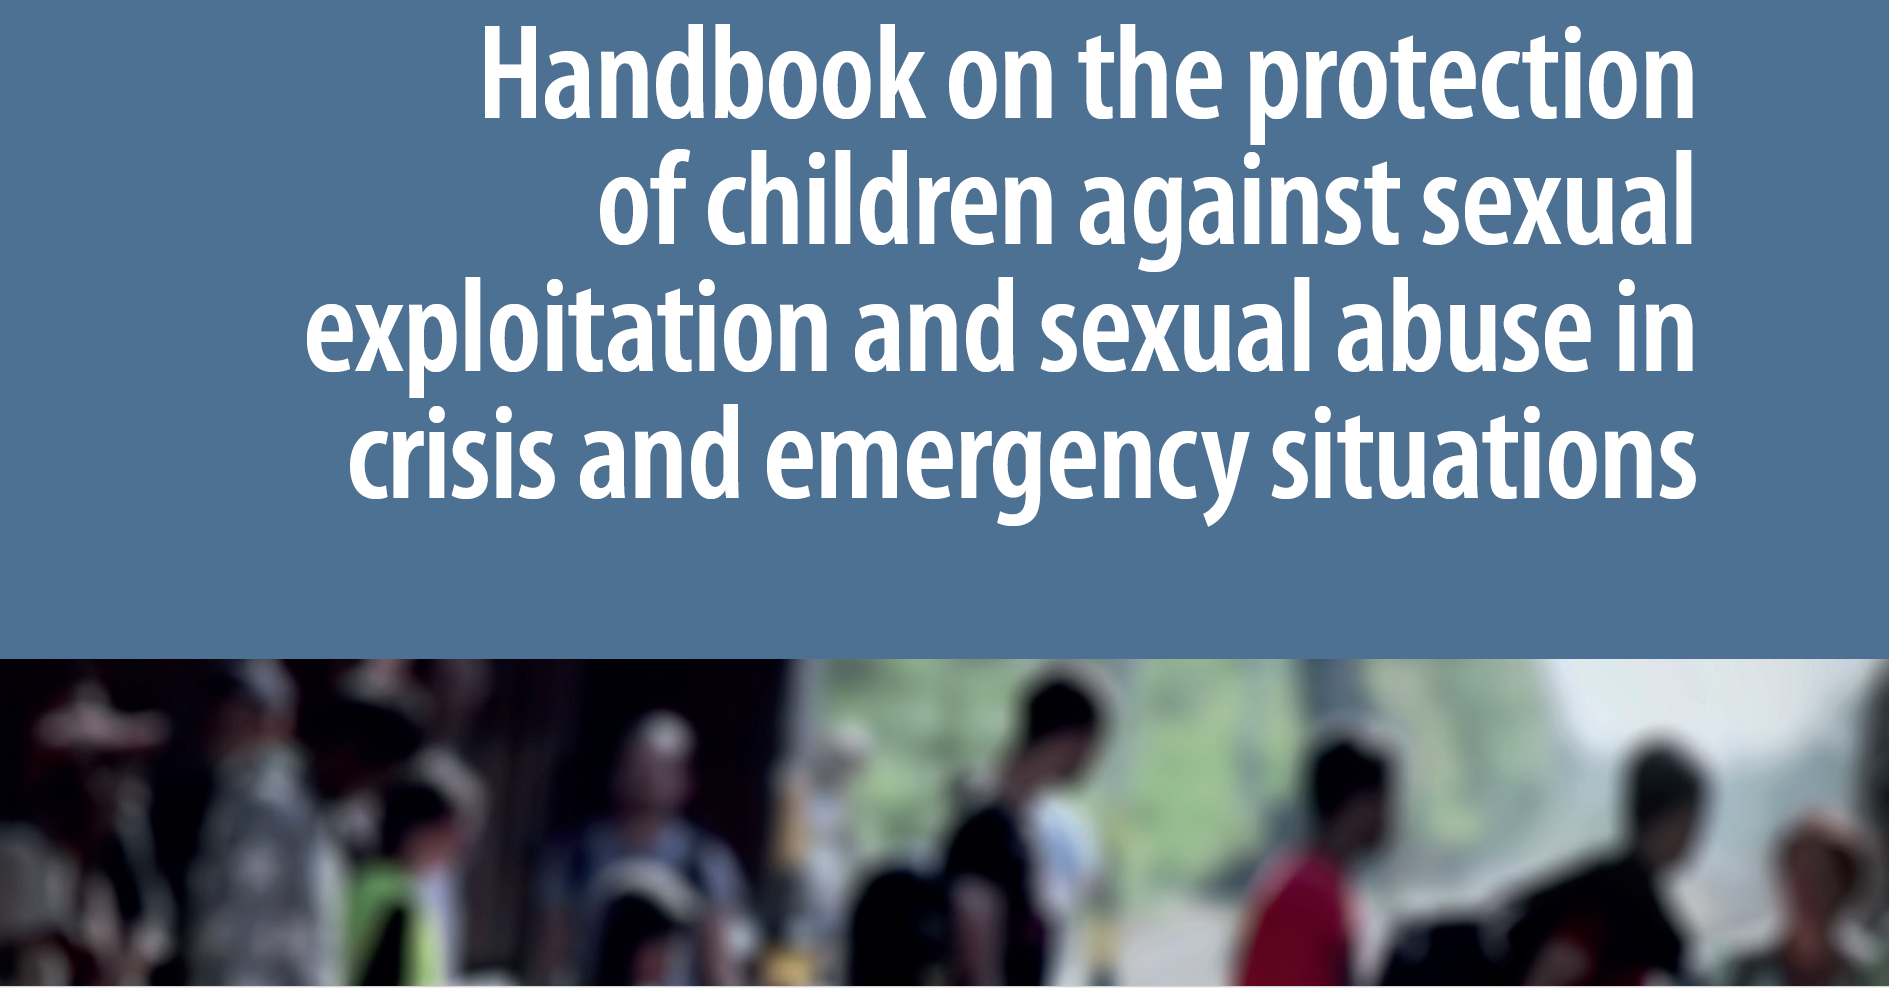 Council of Europe publishes guidance on how to better protect children against sexual exploitation and abuse in crisis and emergency situations